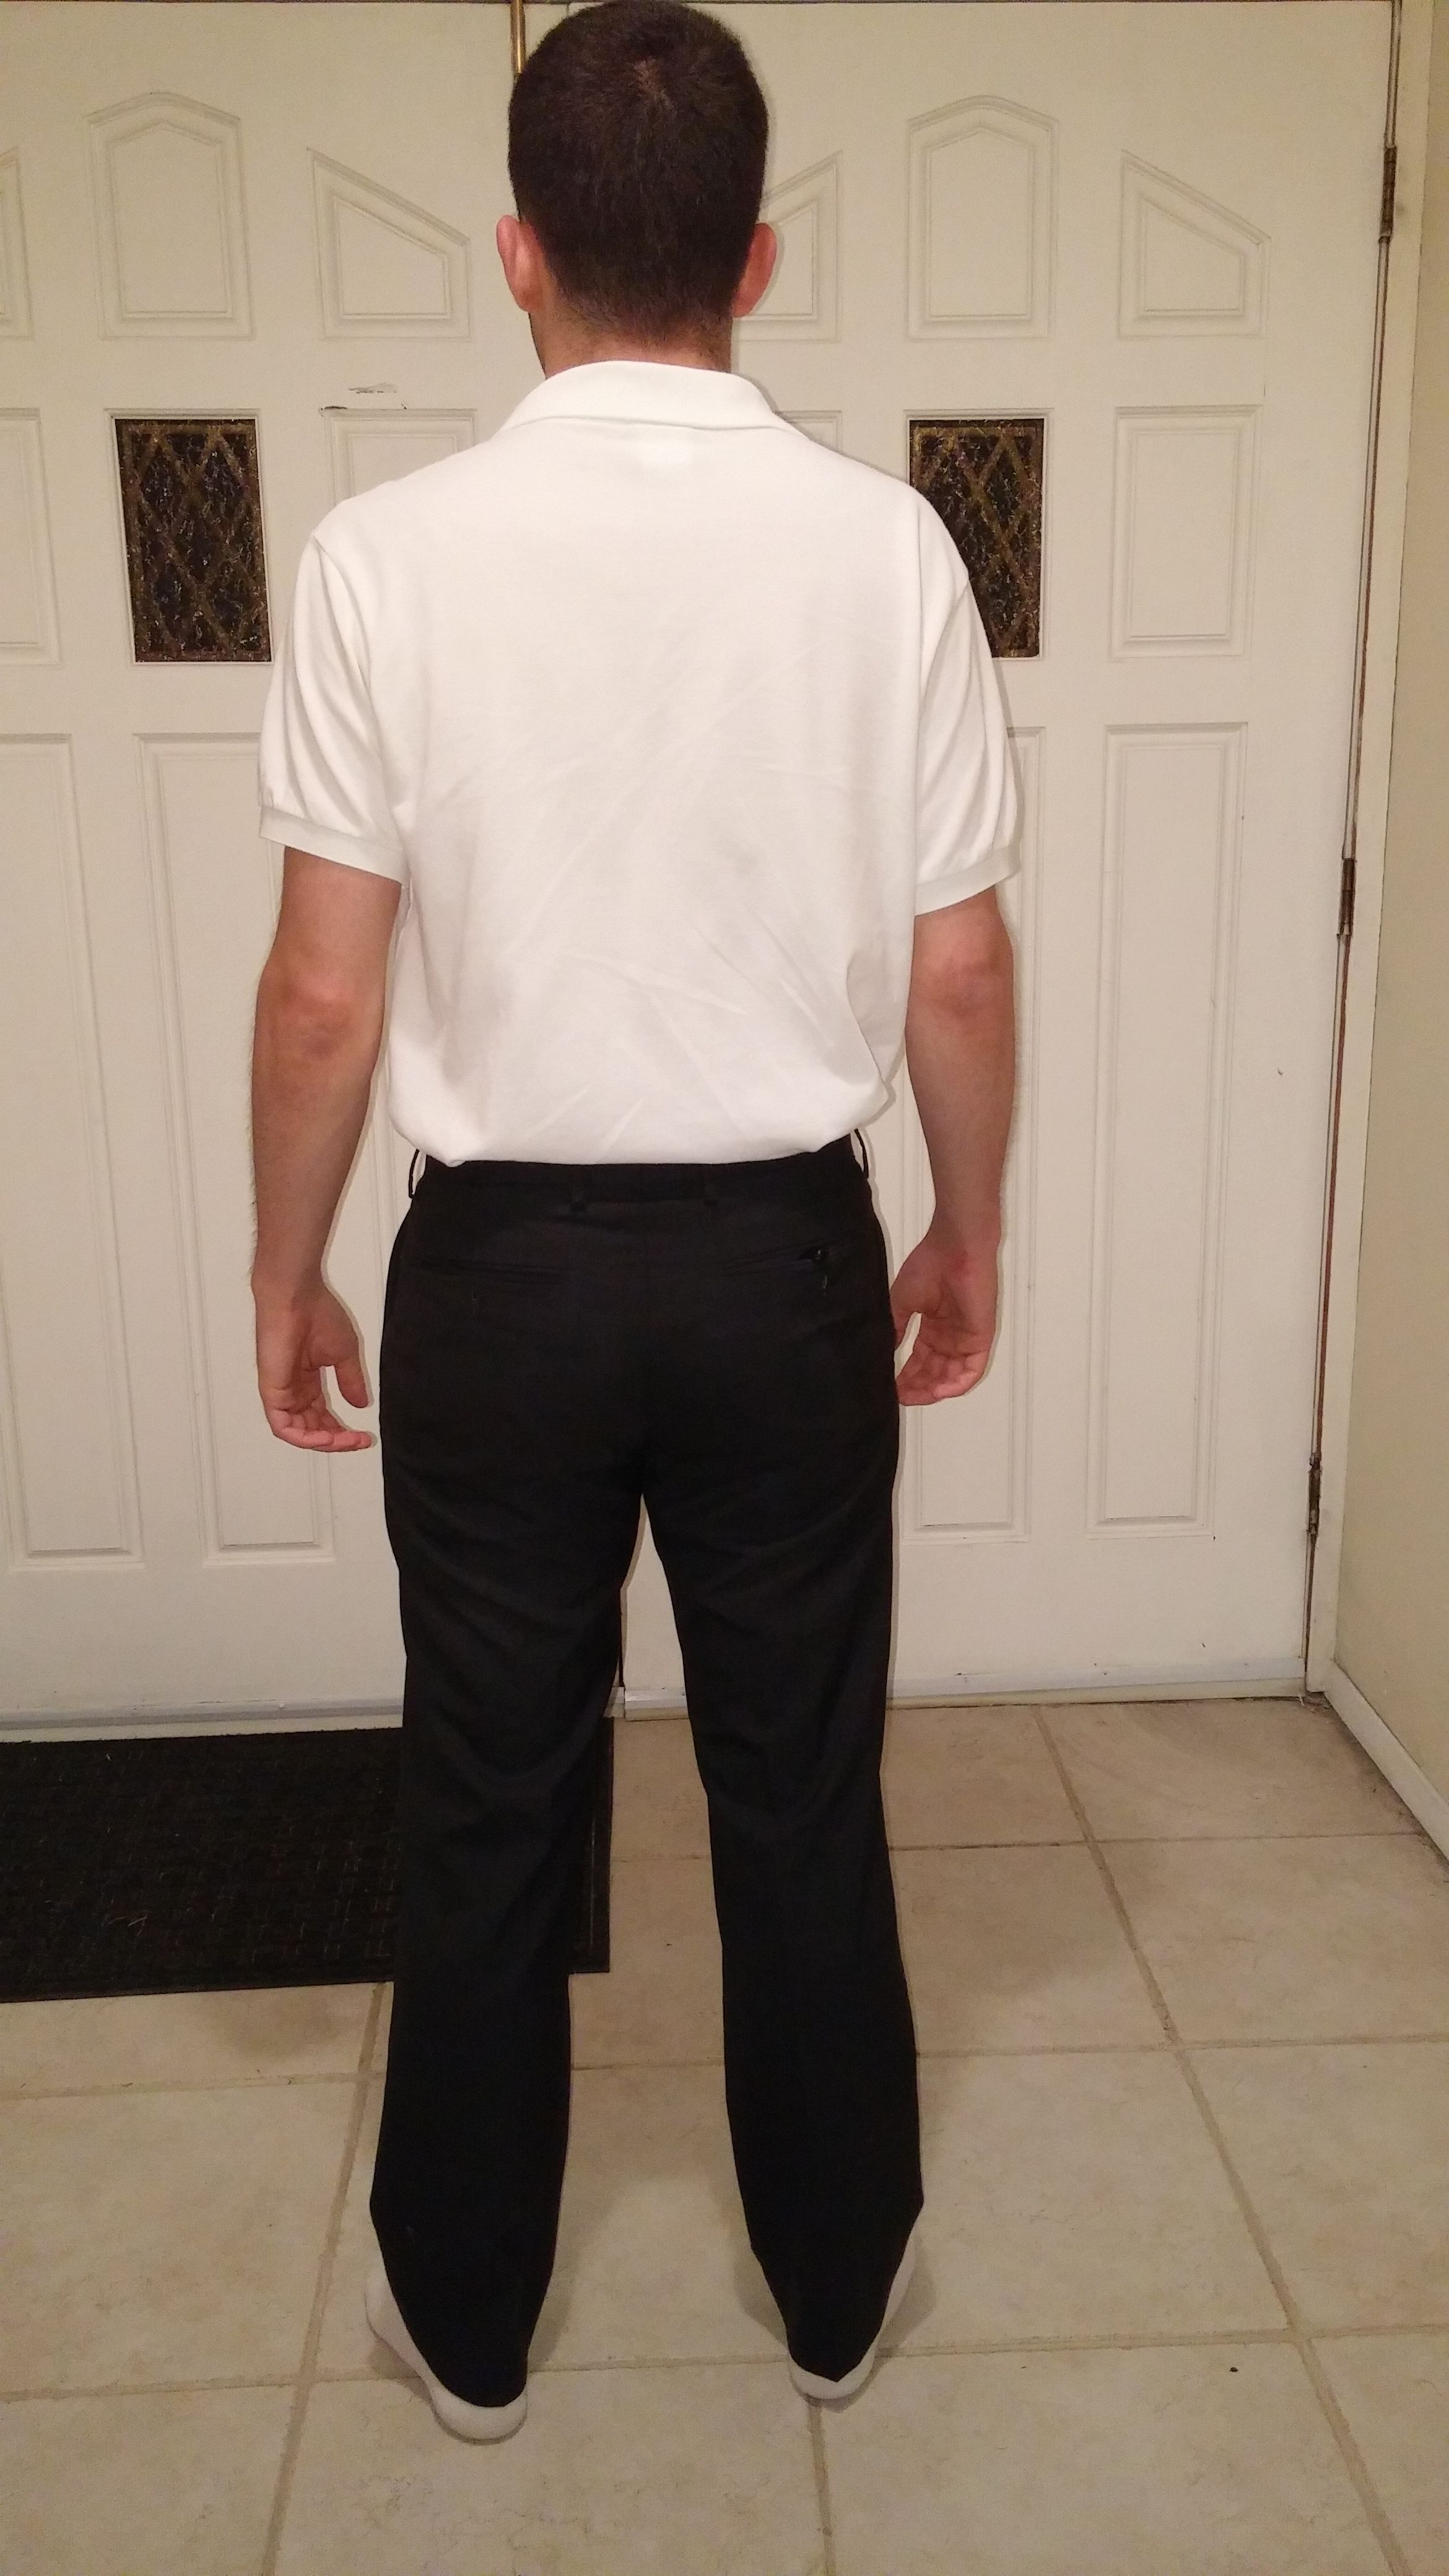 Are these pants too tight? Also, how do they look? | Styleforum